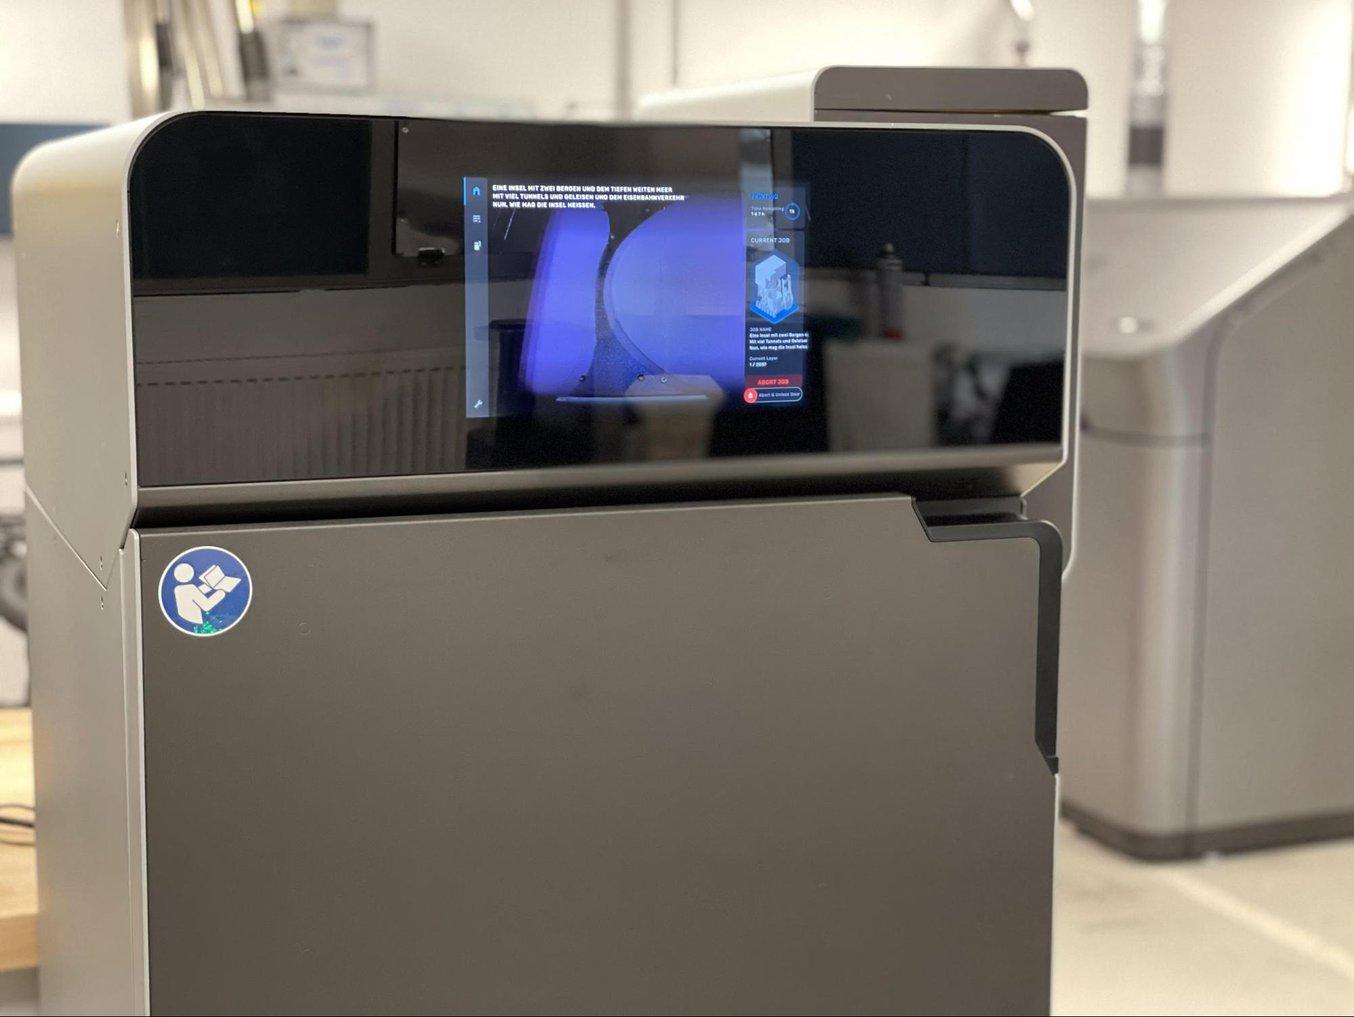 Brose’s AM center is equipped with almost all the 3D printing processes on the market, including their newest addition, the Fuse 1.